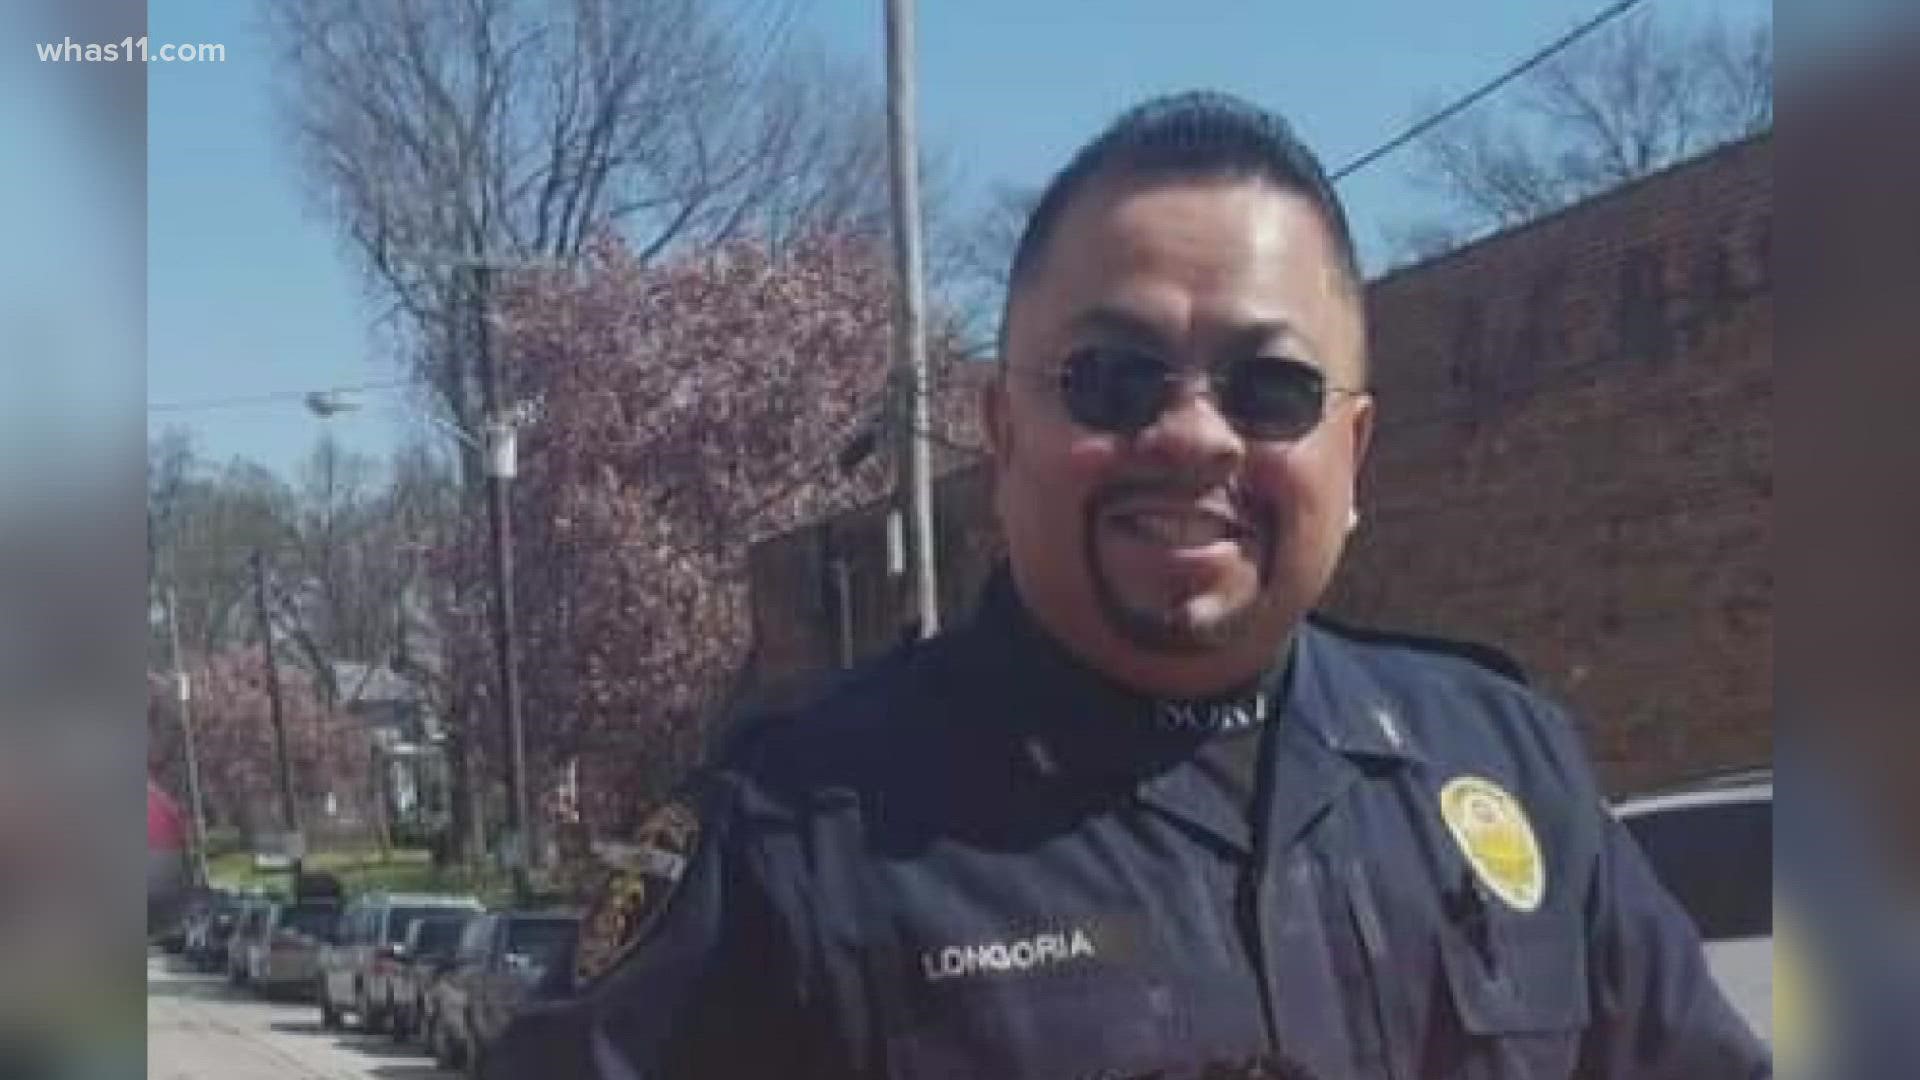 At the end of August, Officer Rick Longoria came down with what he thought was a cold. Within days, he was in critical condition at Baptist Health Hardin.